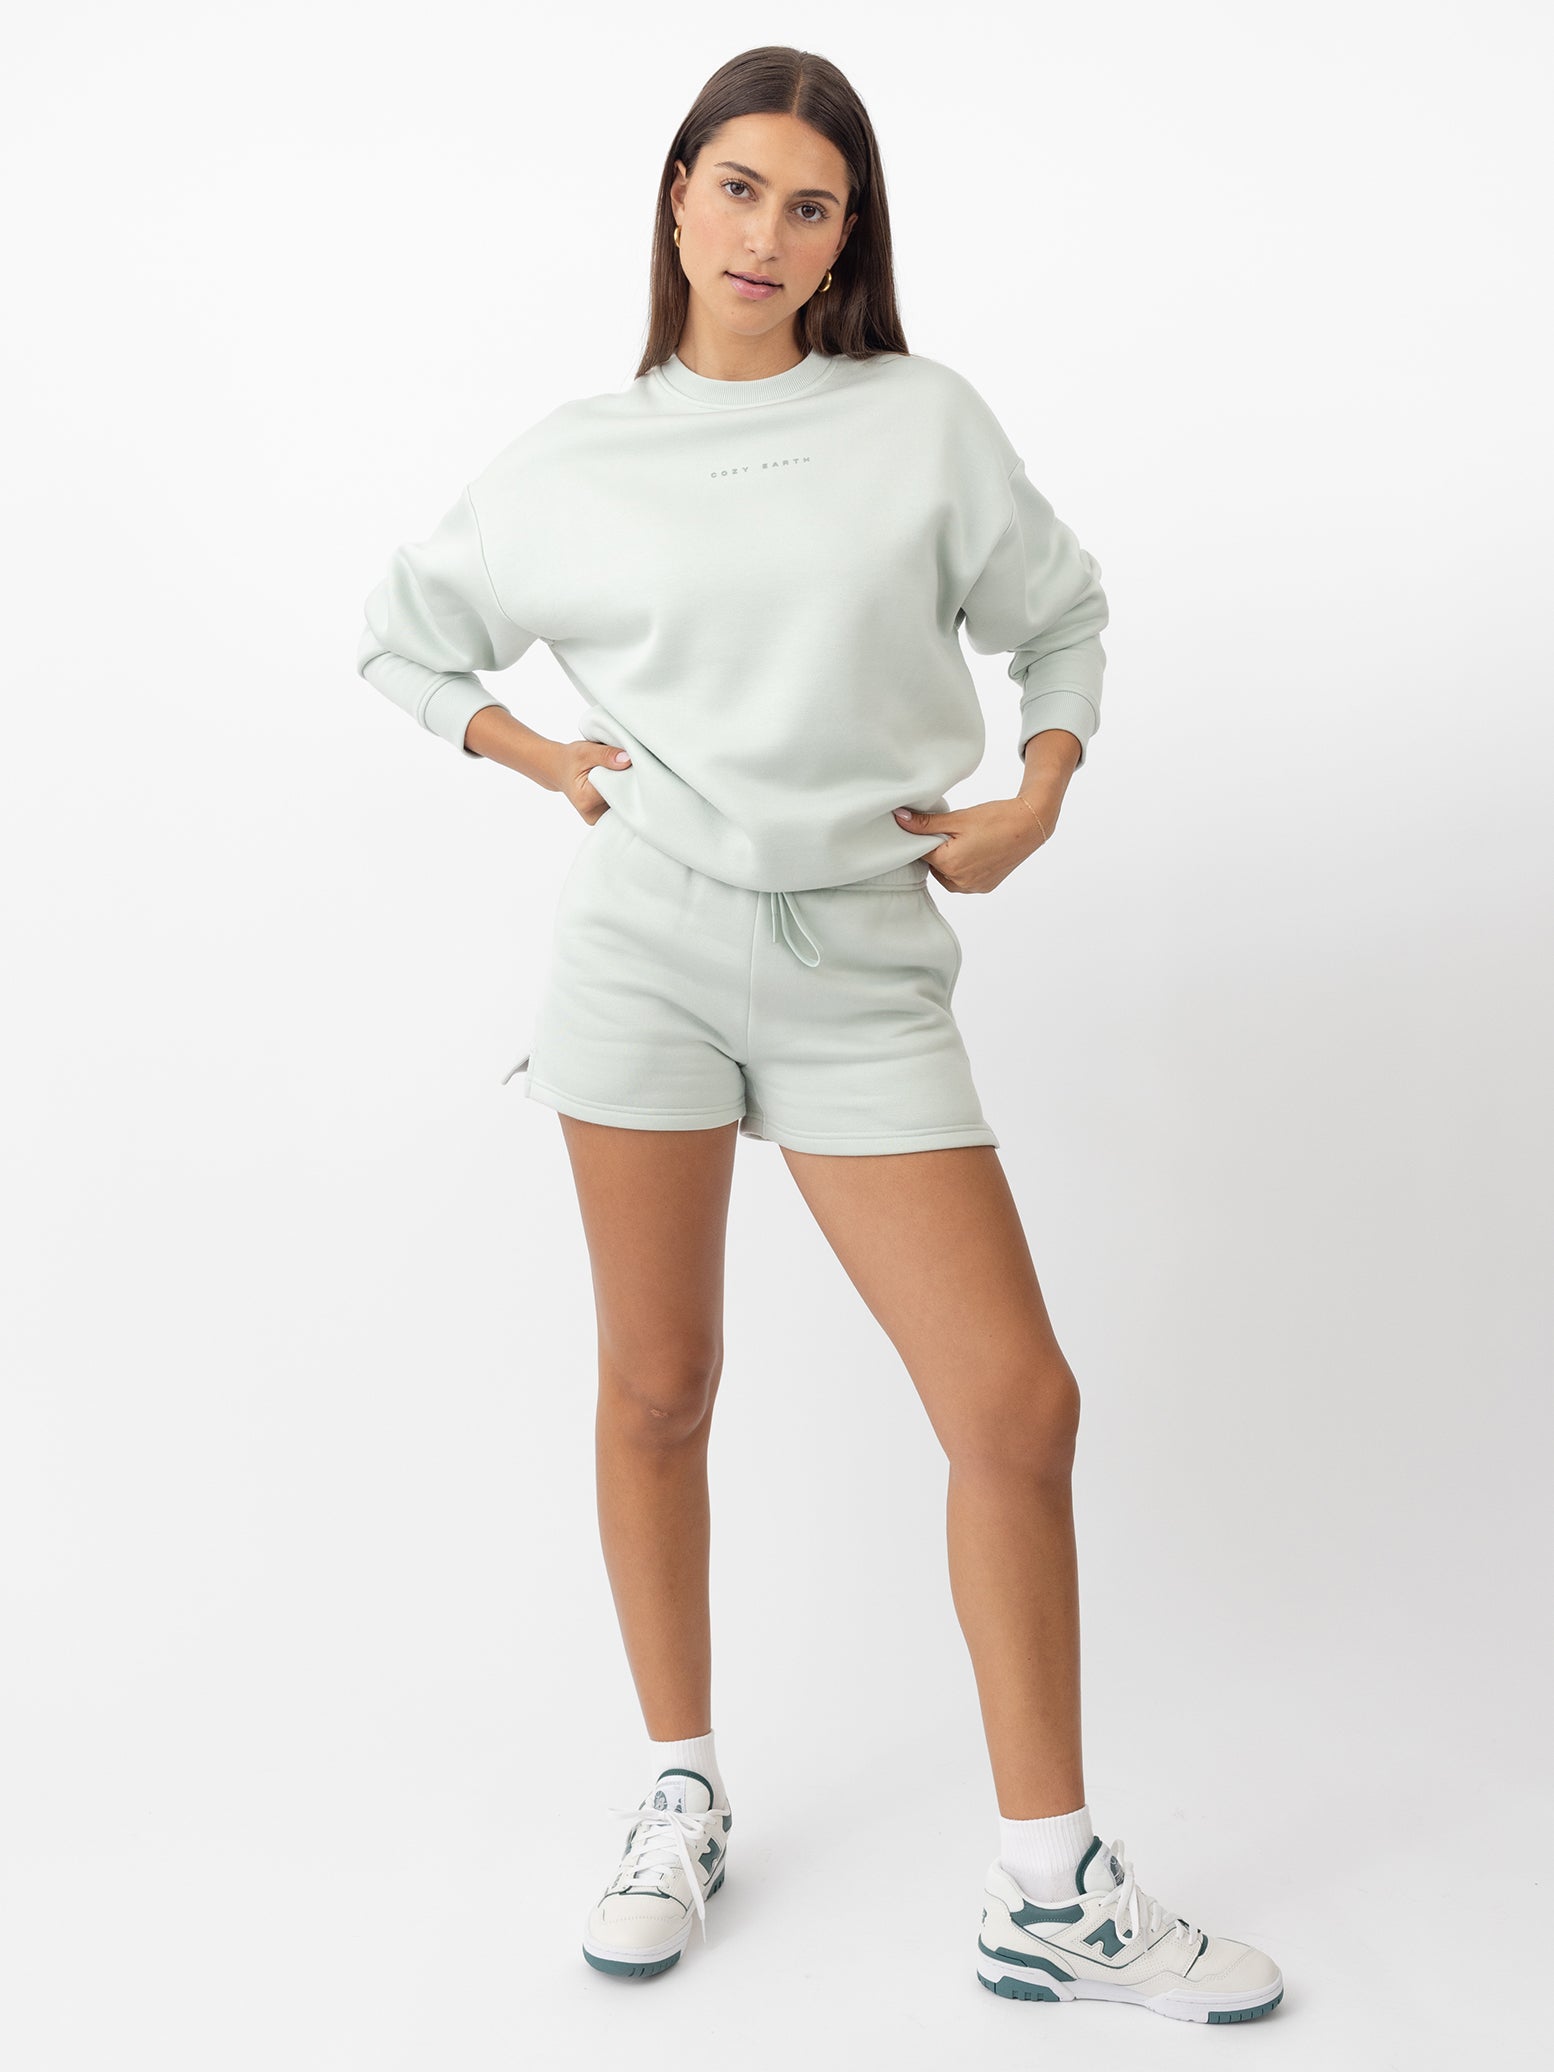 Arctic CityScape Pullover Crew. The Pullover is being worn by a female model. Accompanying city scape clothing is being worn to complete the look of the outfit. The photo was taken with a white background. 